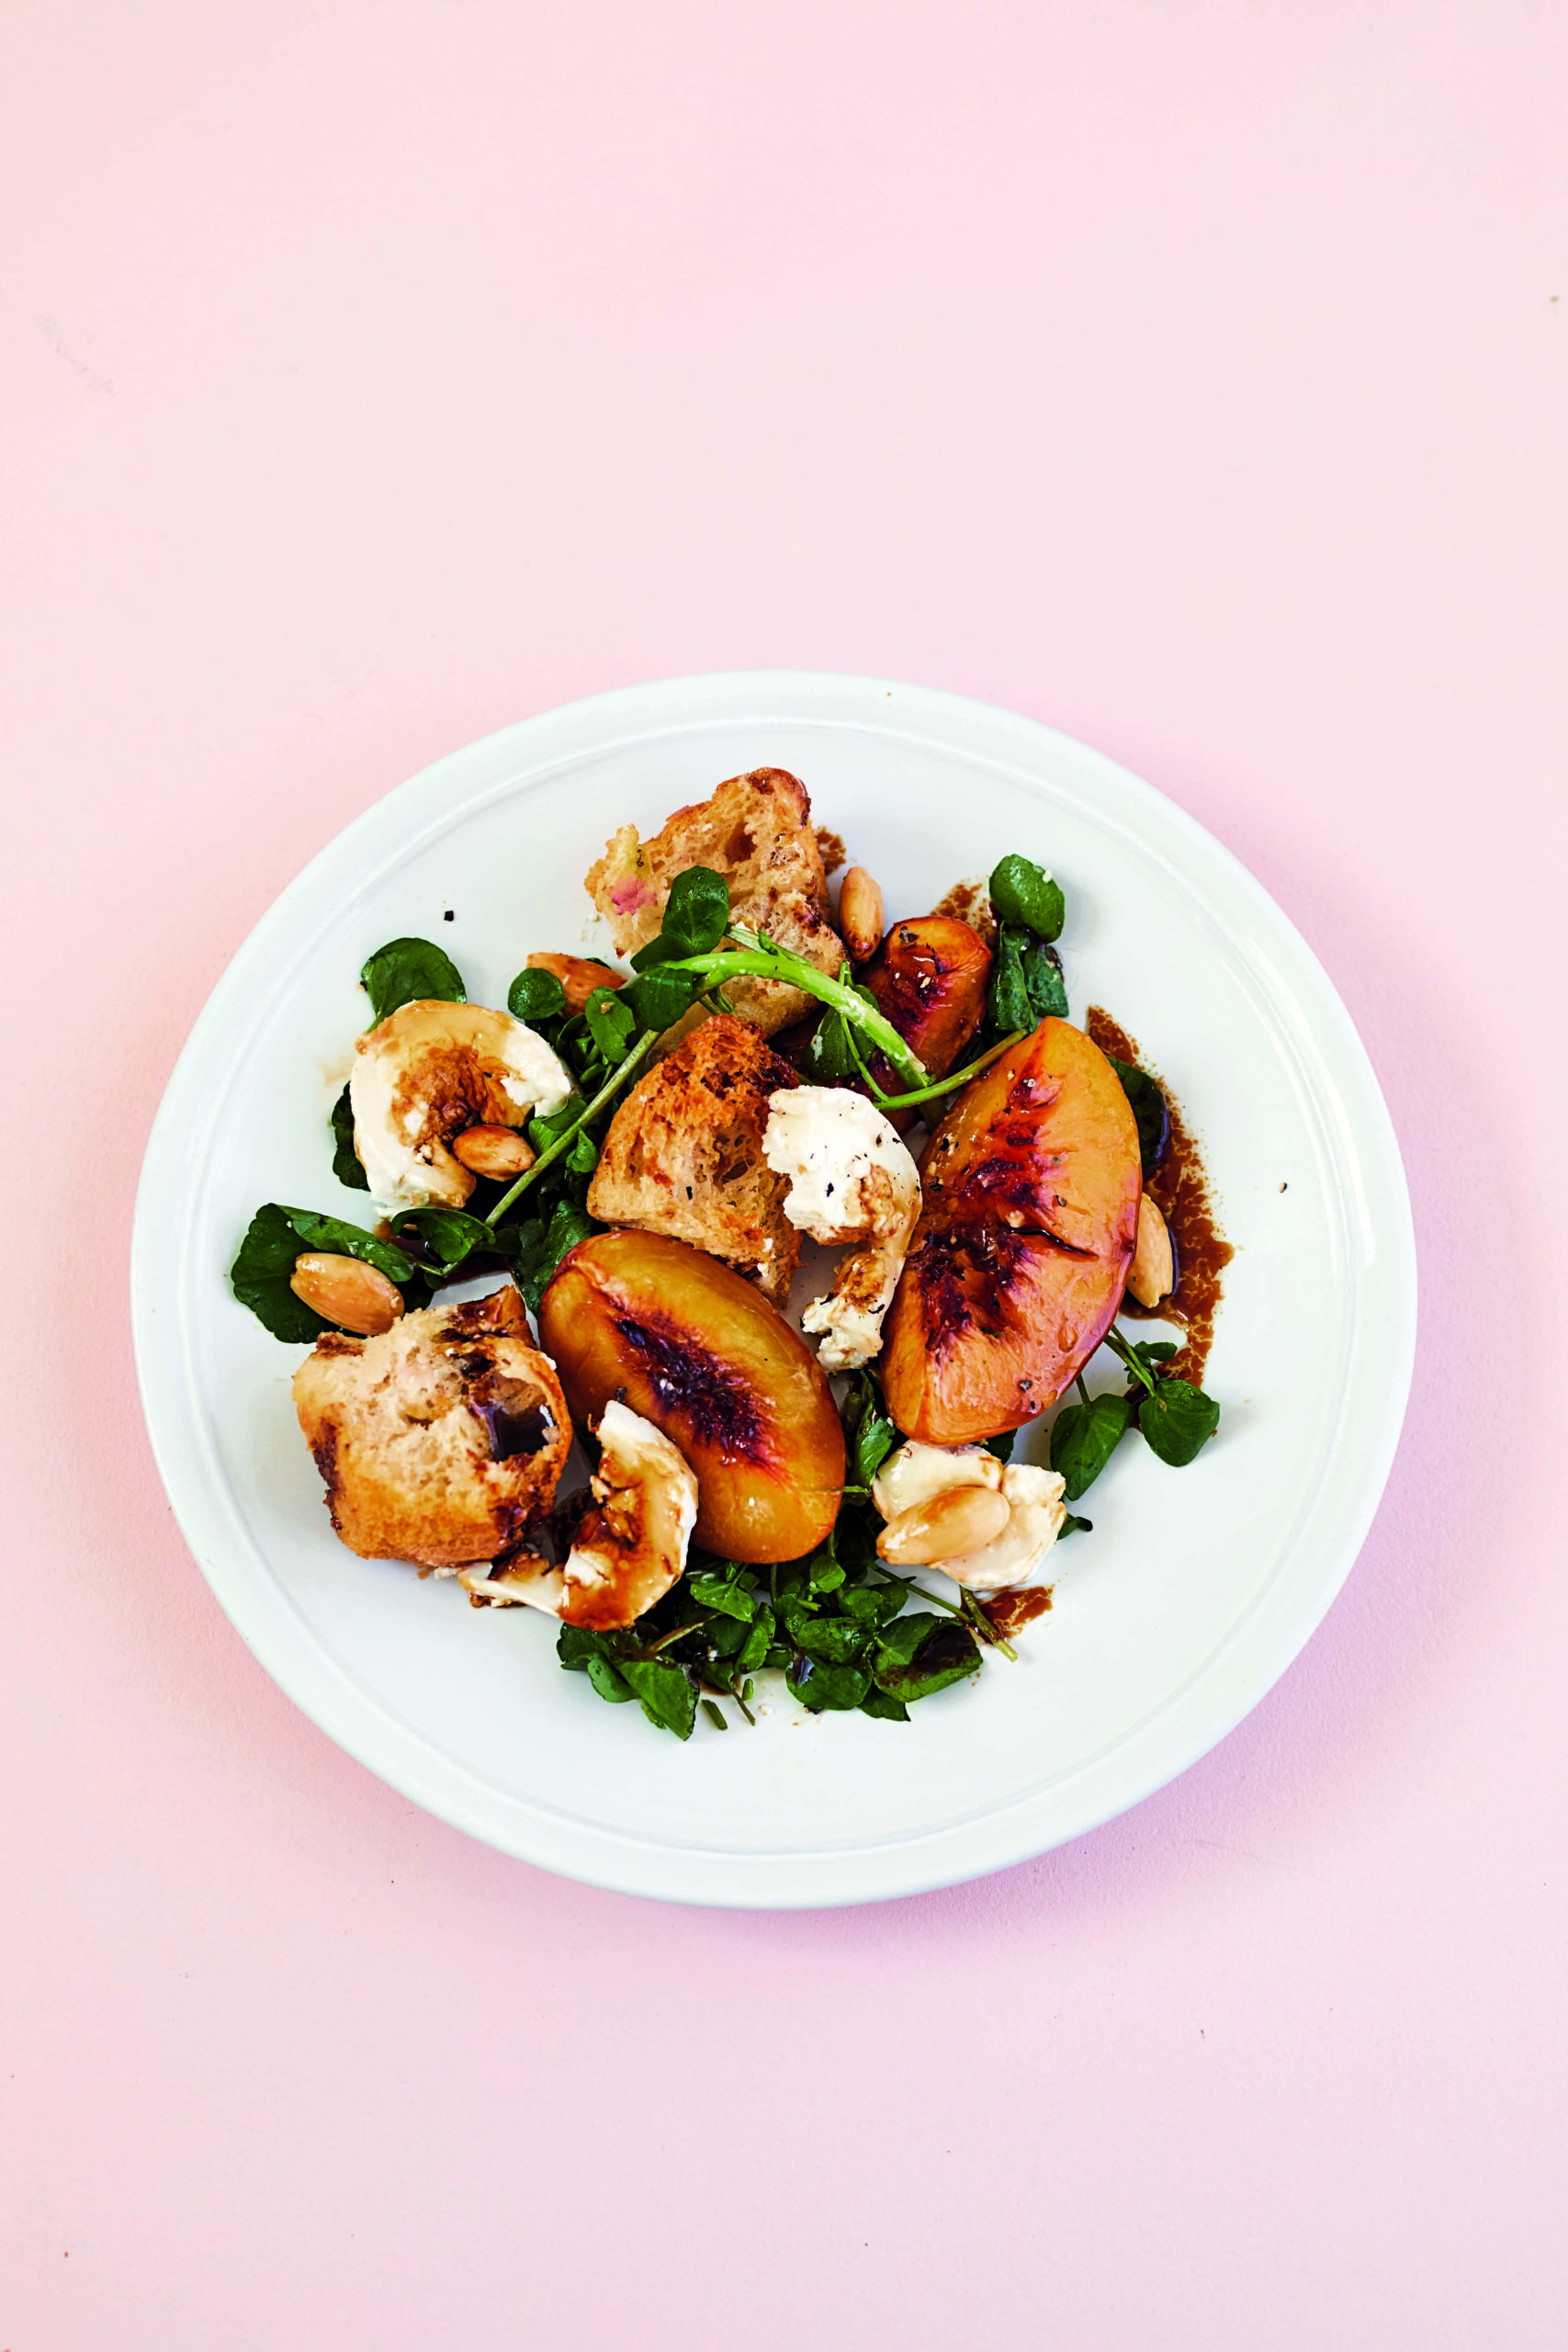 Roasted Nectarines With Goat’s Cheese, Almonds, Watercress and Croutons